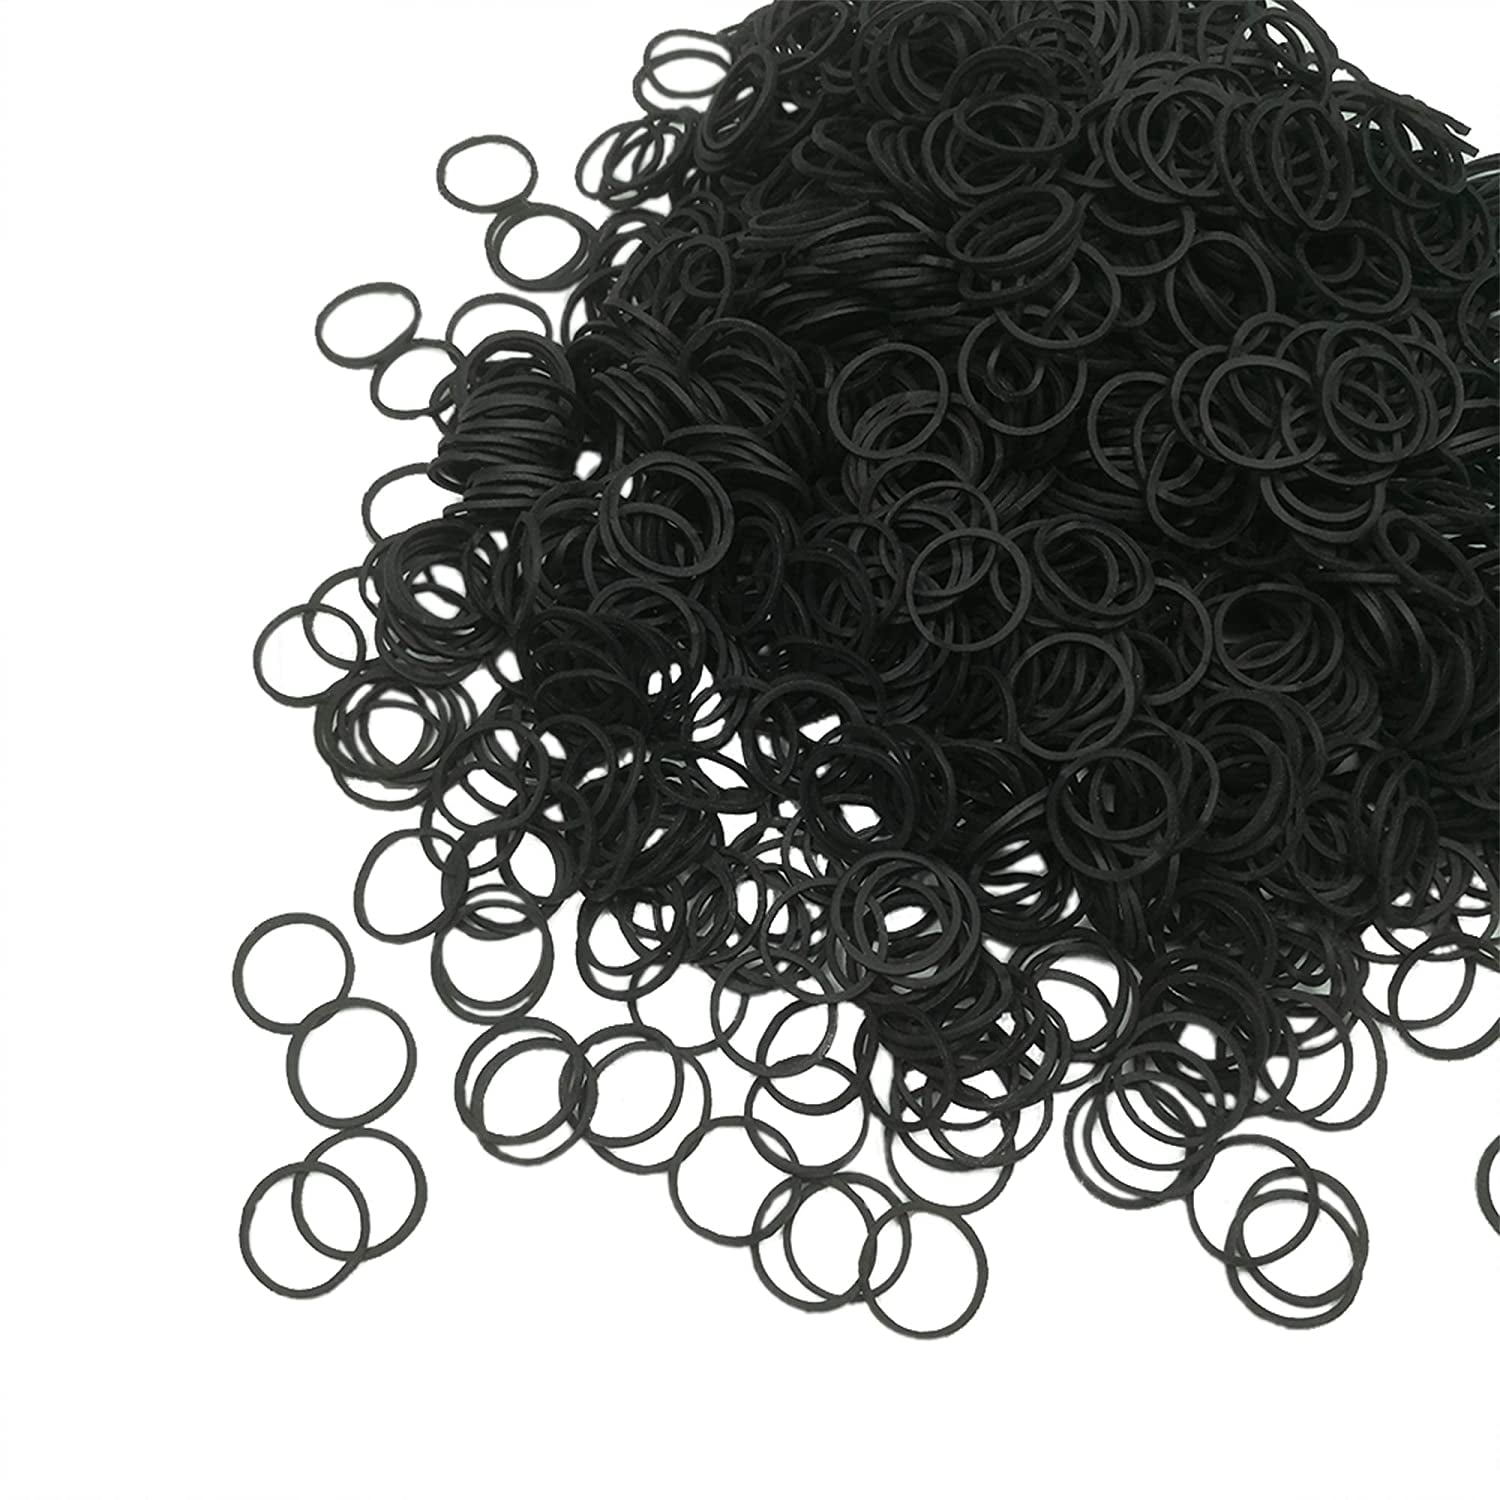 Wedding Hairstyle and More Soft Hair Elastics Ties Bands for Kids Hair Mini Hair Rubber Bands 500pcs Black Elastic Hair Bands Braids Hair